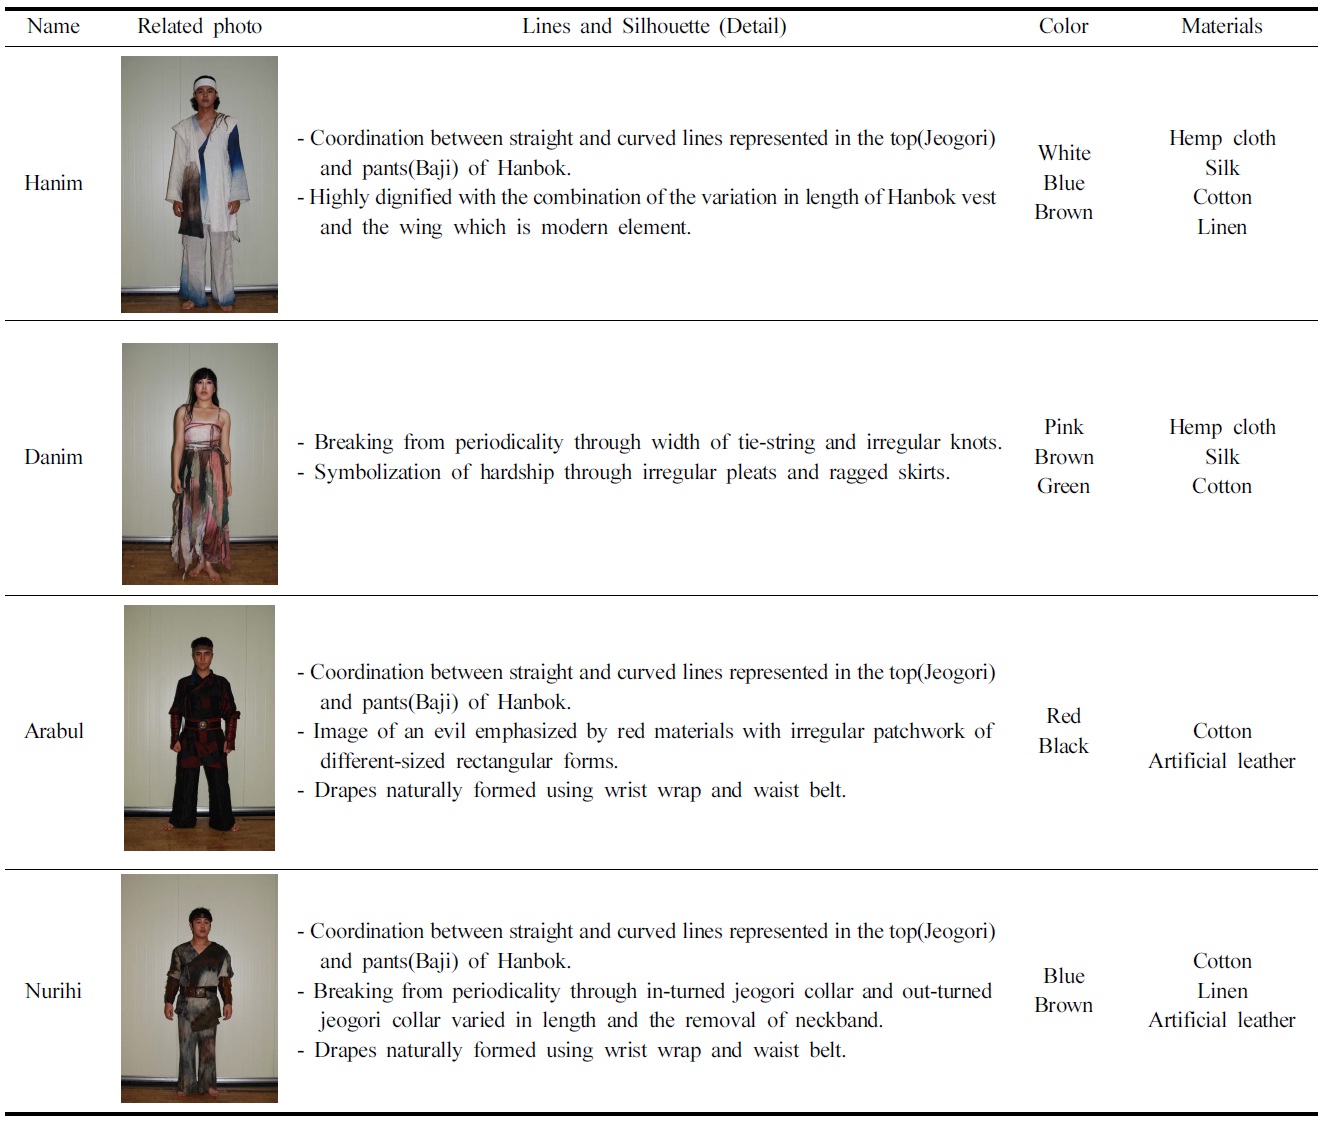 Analysis of costumes based on design elements